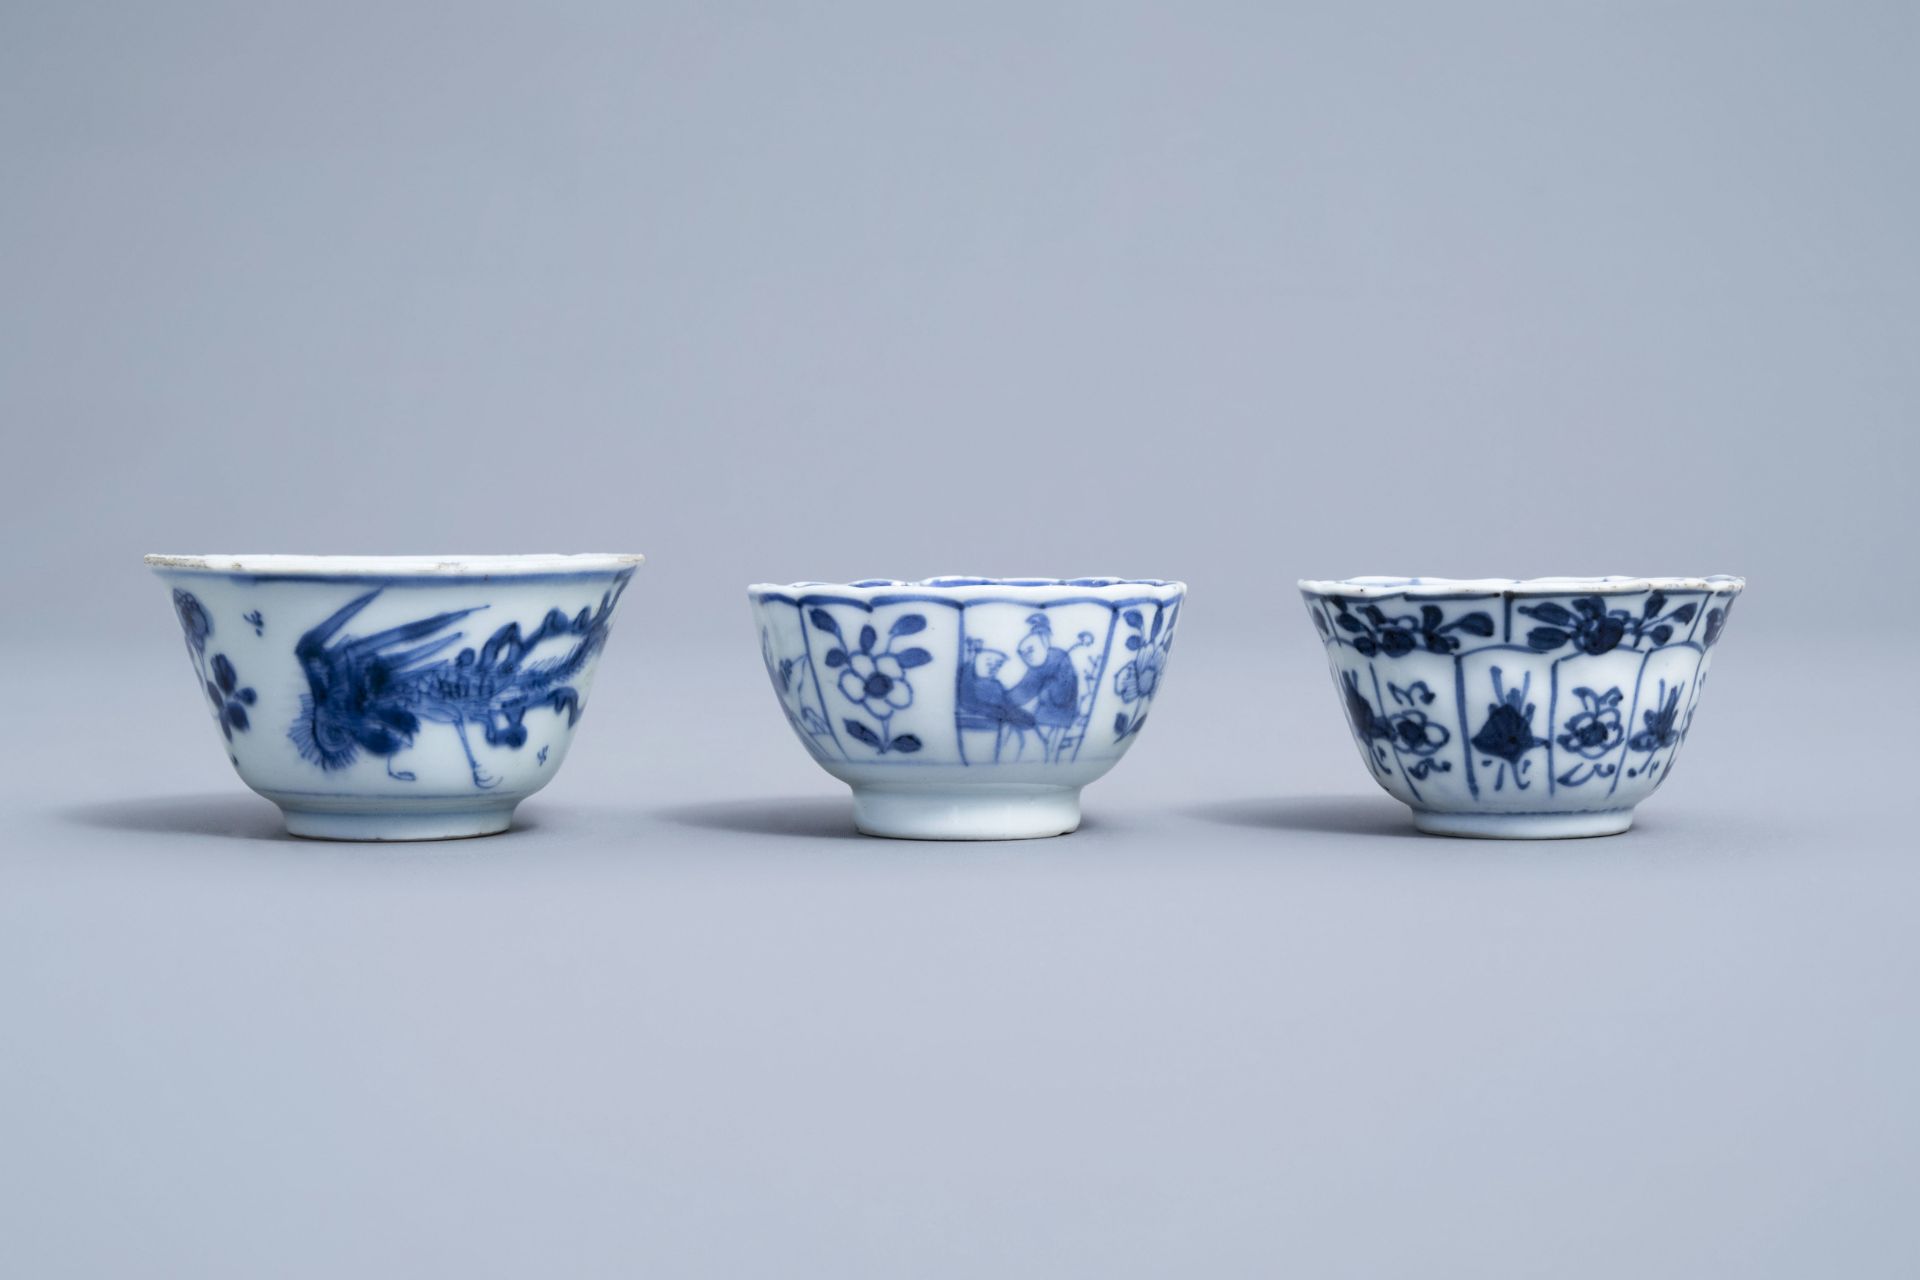 A varied collection of Chinese blue and white porcelain, 18th C. and later - Image 35 of 54